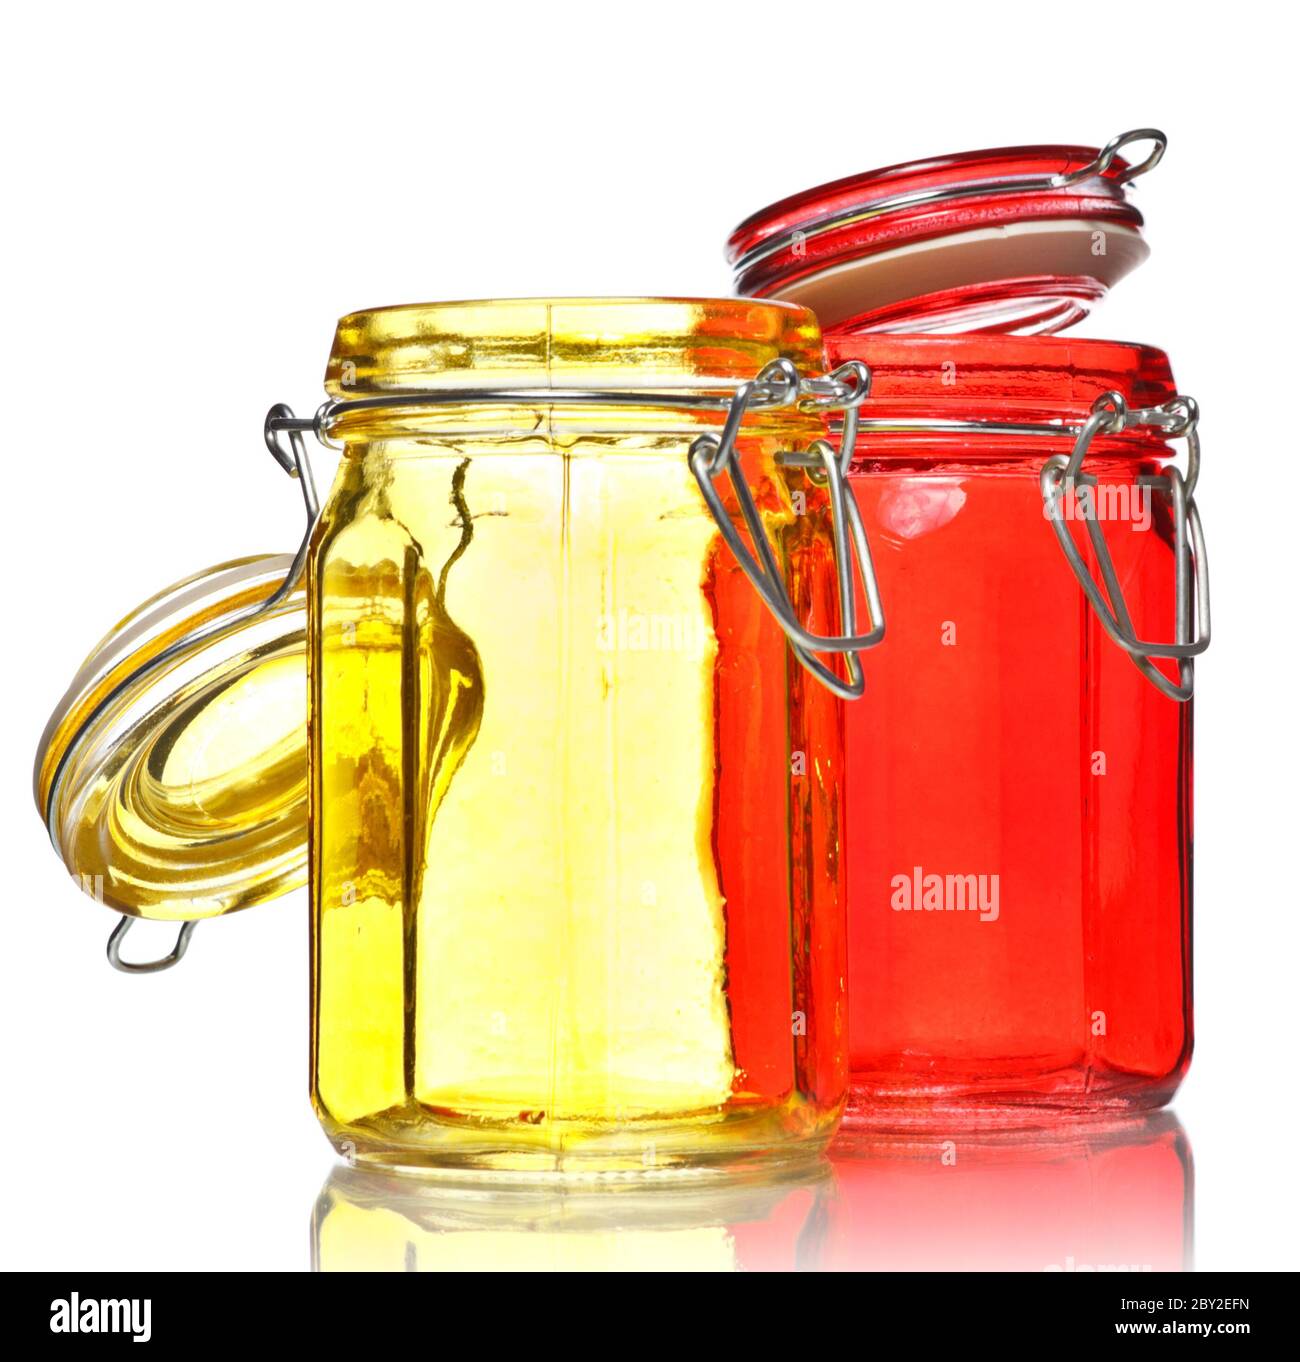 Glass Jars for Spice Stock Photo